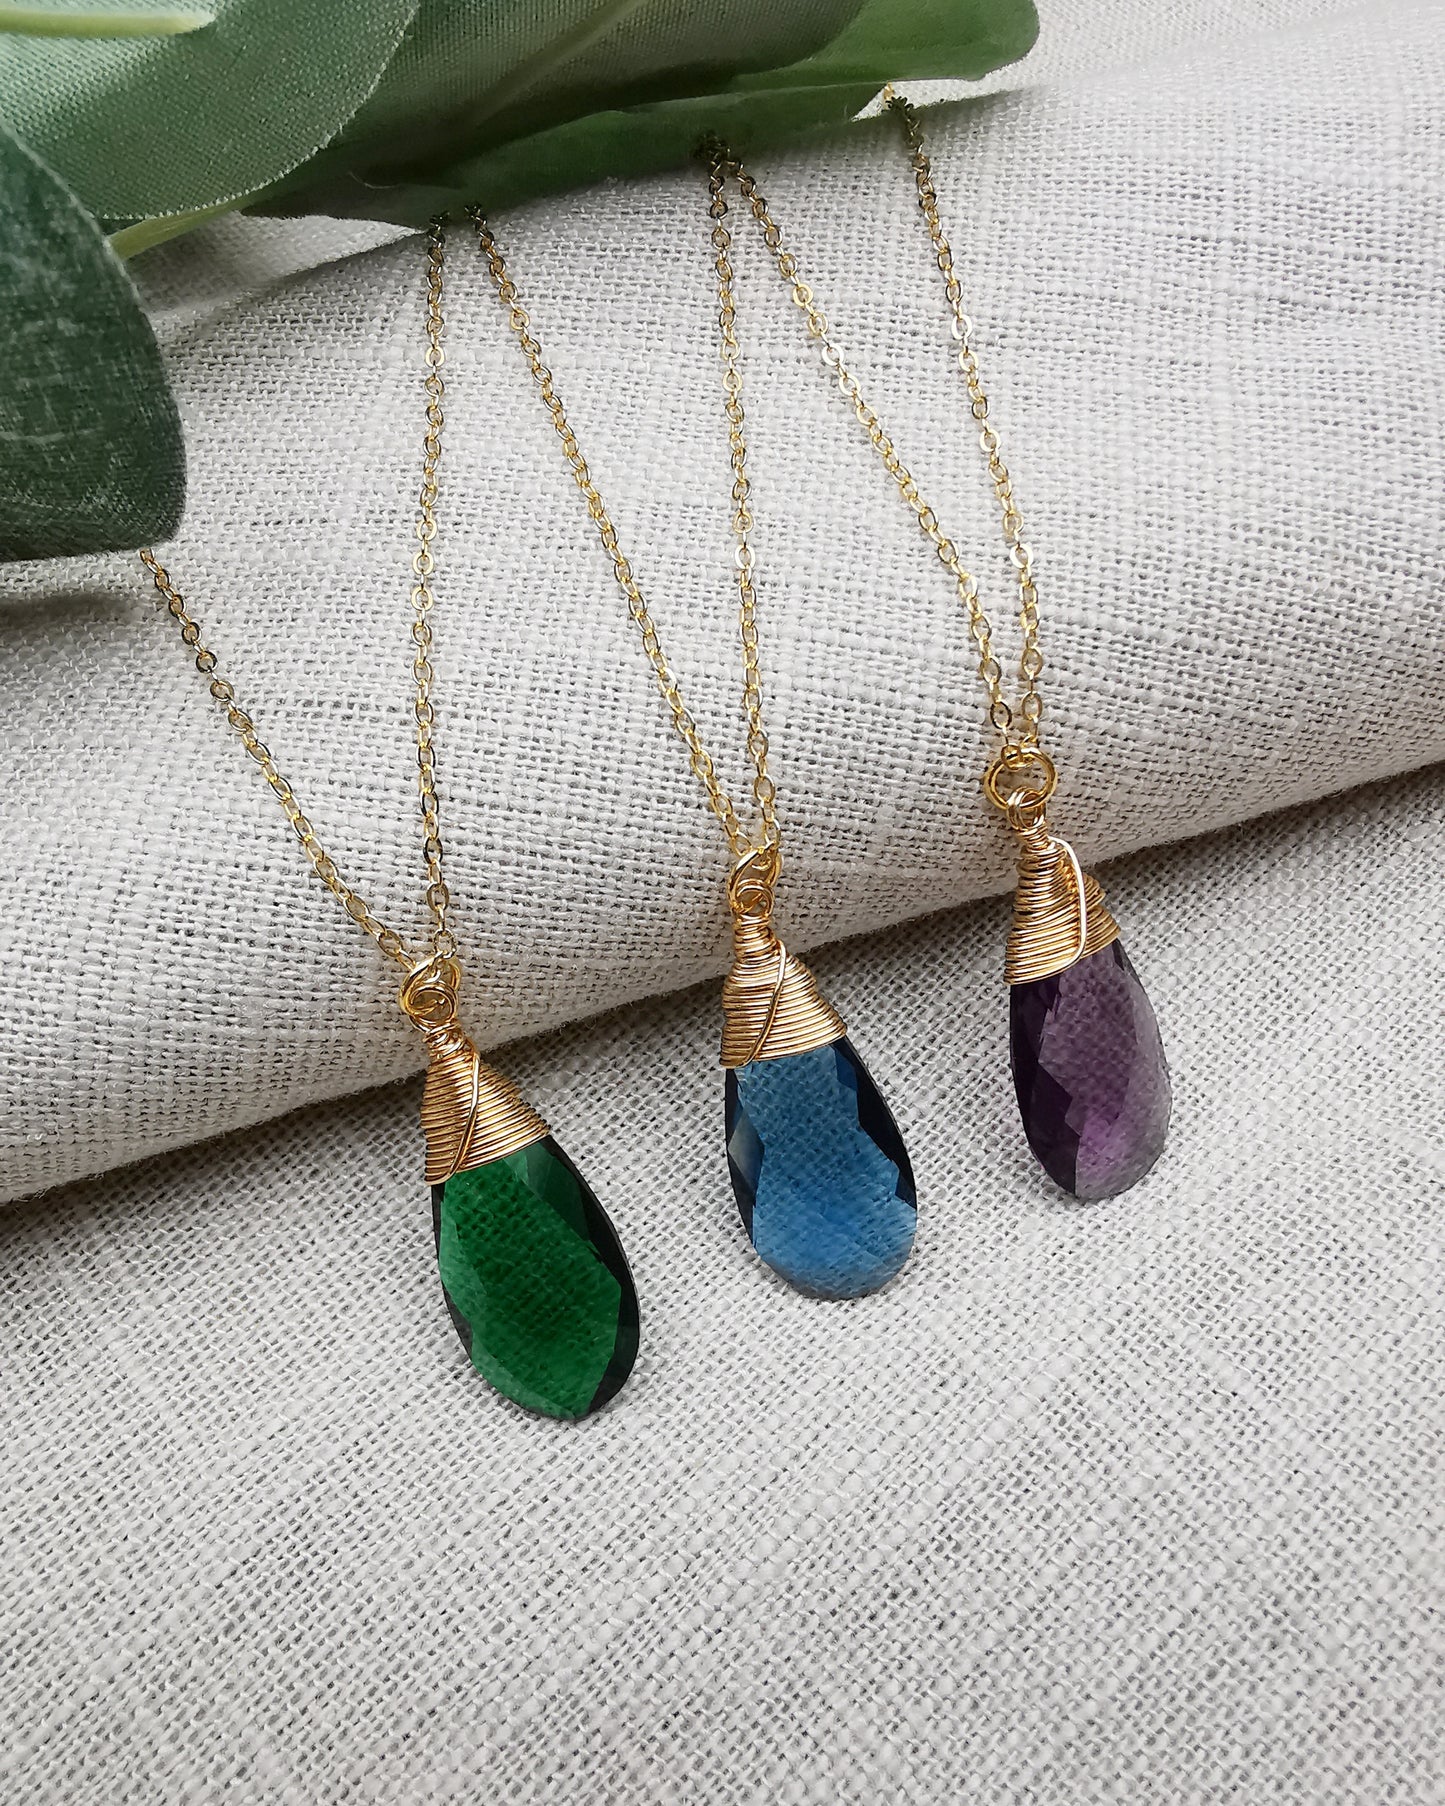 18k Gold Plated over 925 Sterling silver Gemstone Pendant Necklace